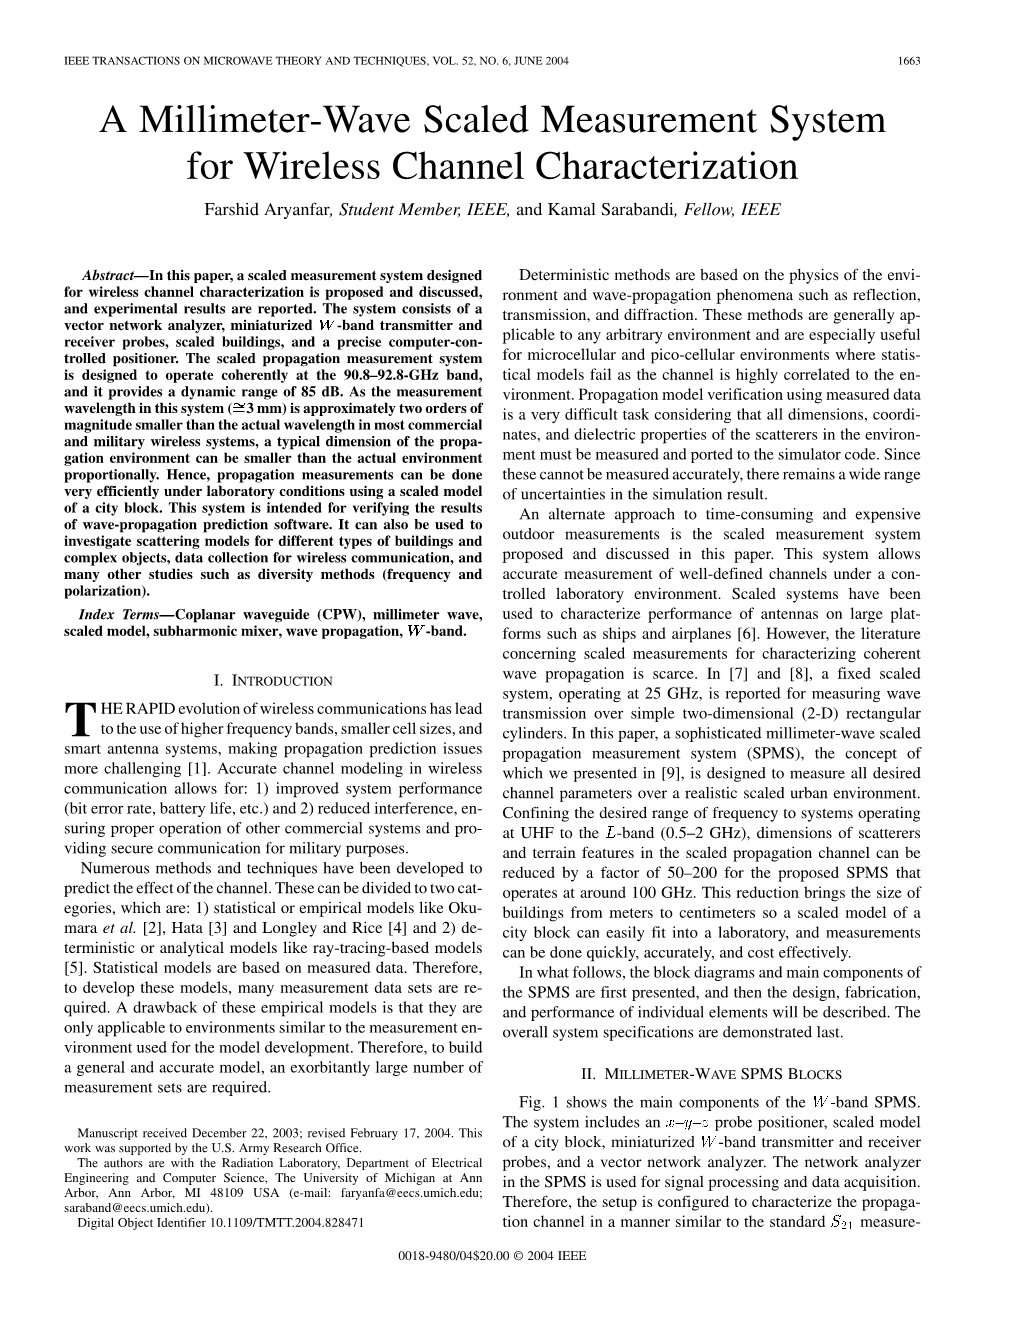 A Millimeter-Wave Scaled Measurement System for Wireless Channel Characterization Farshid Aryanfar, Student Member, IEEE, and Kamal Sarabandi, Fellow, IEEE